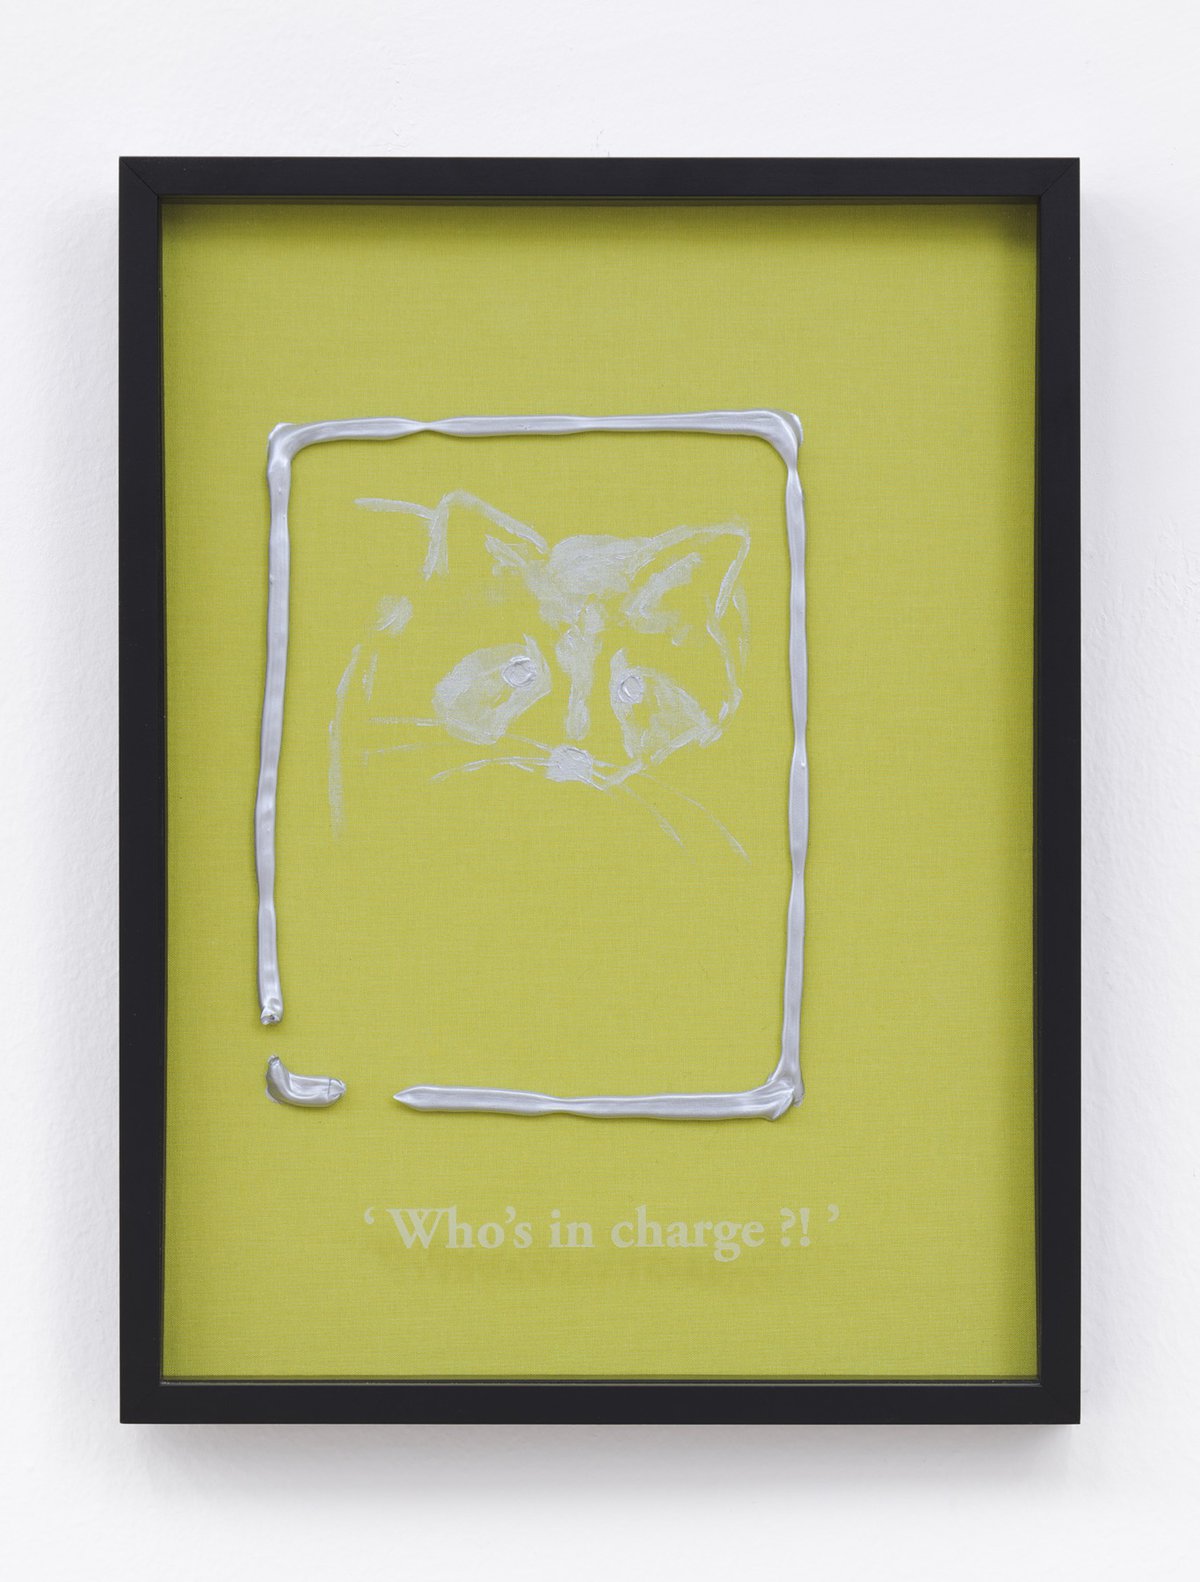 Philipp Timischl&quot;Who&#x27;s in charge?!&quot; (Lemon/Silver), 2017Acrylic on linen and glass-engraved object frame40.1 x 32.1 cm